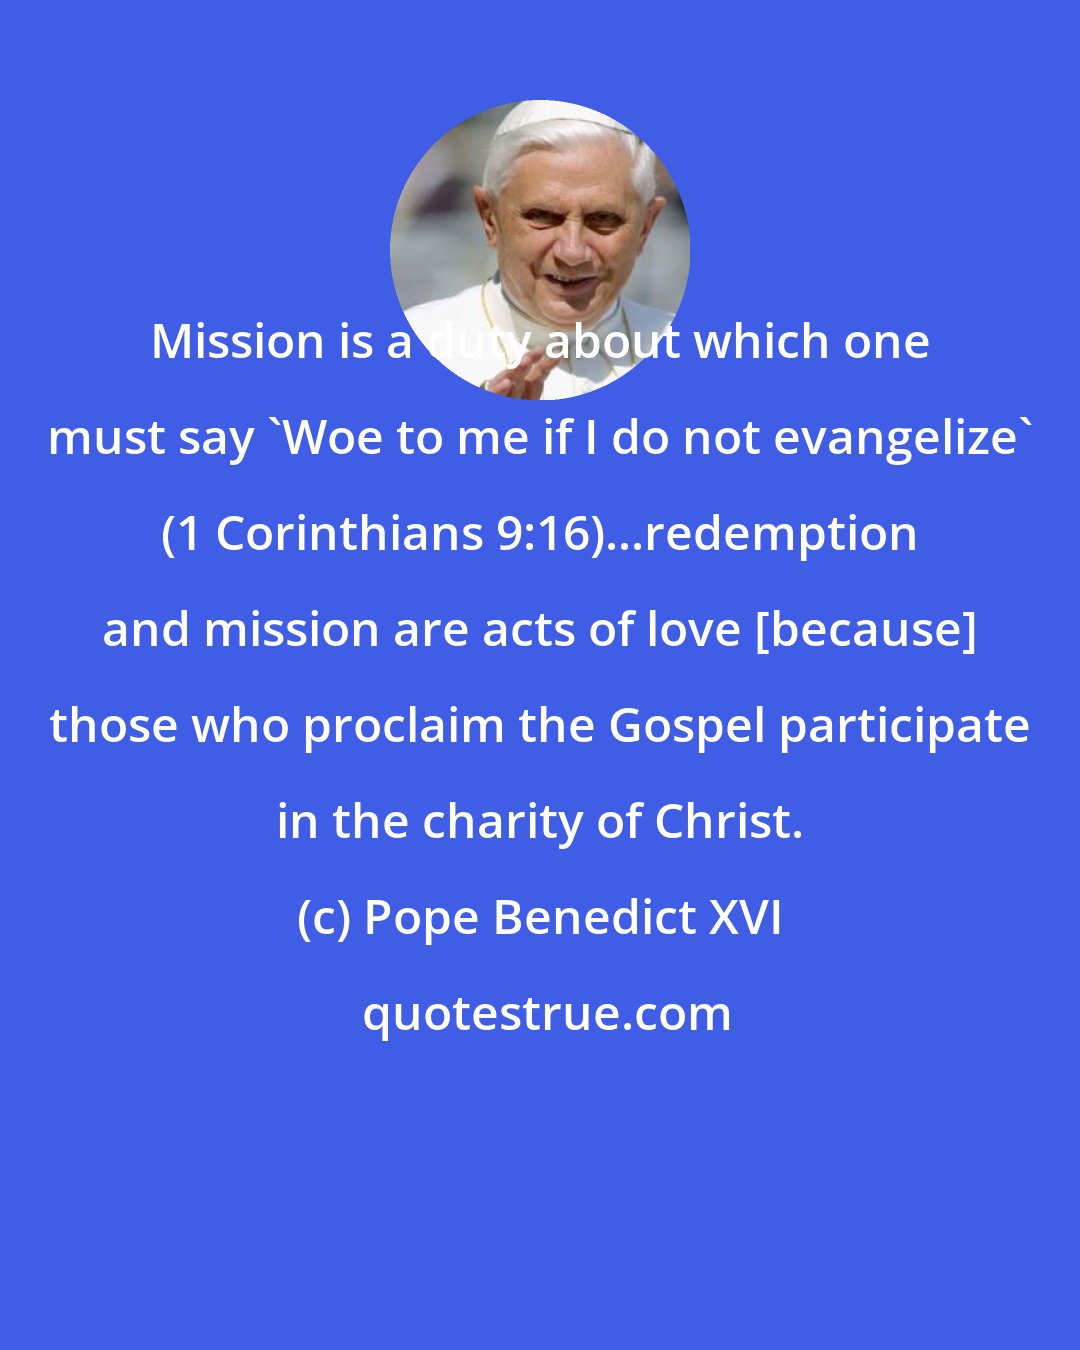 Pope Benedict XVI: Mission is a duty about which one must say 'Woe to me if I do not evangelize' (1 Corinthians 9:16)...redemption and mission are acts of love [because] those who proclaim the Gospel participate in the charity of Christ.